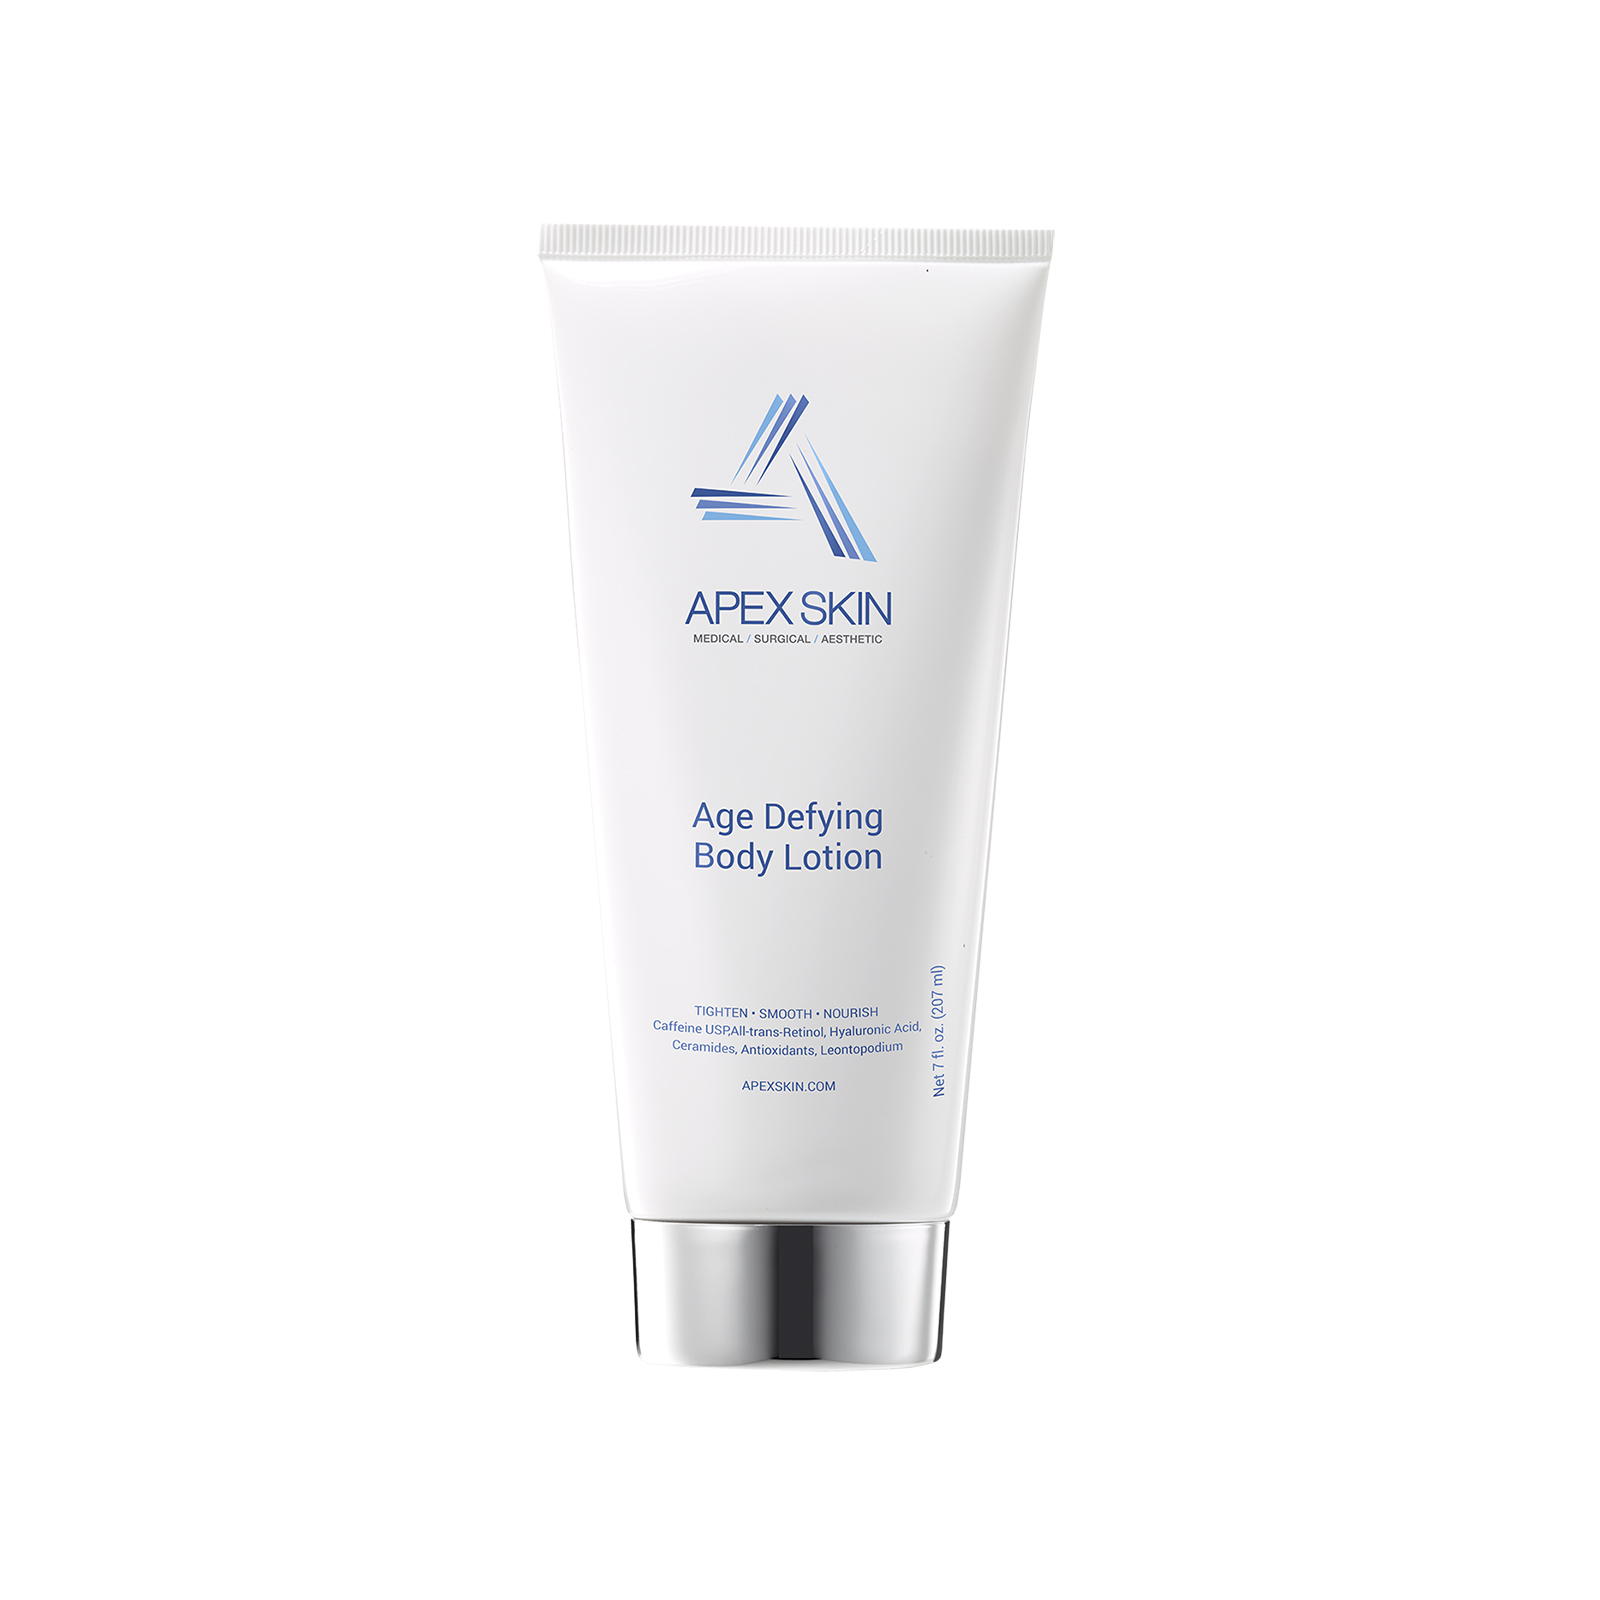 Age Defying Body Lotion